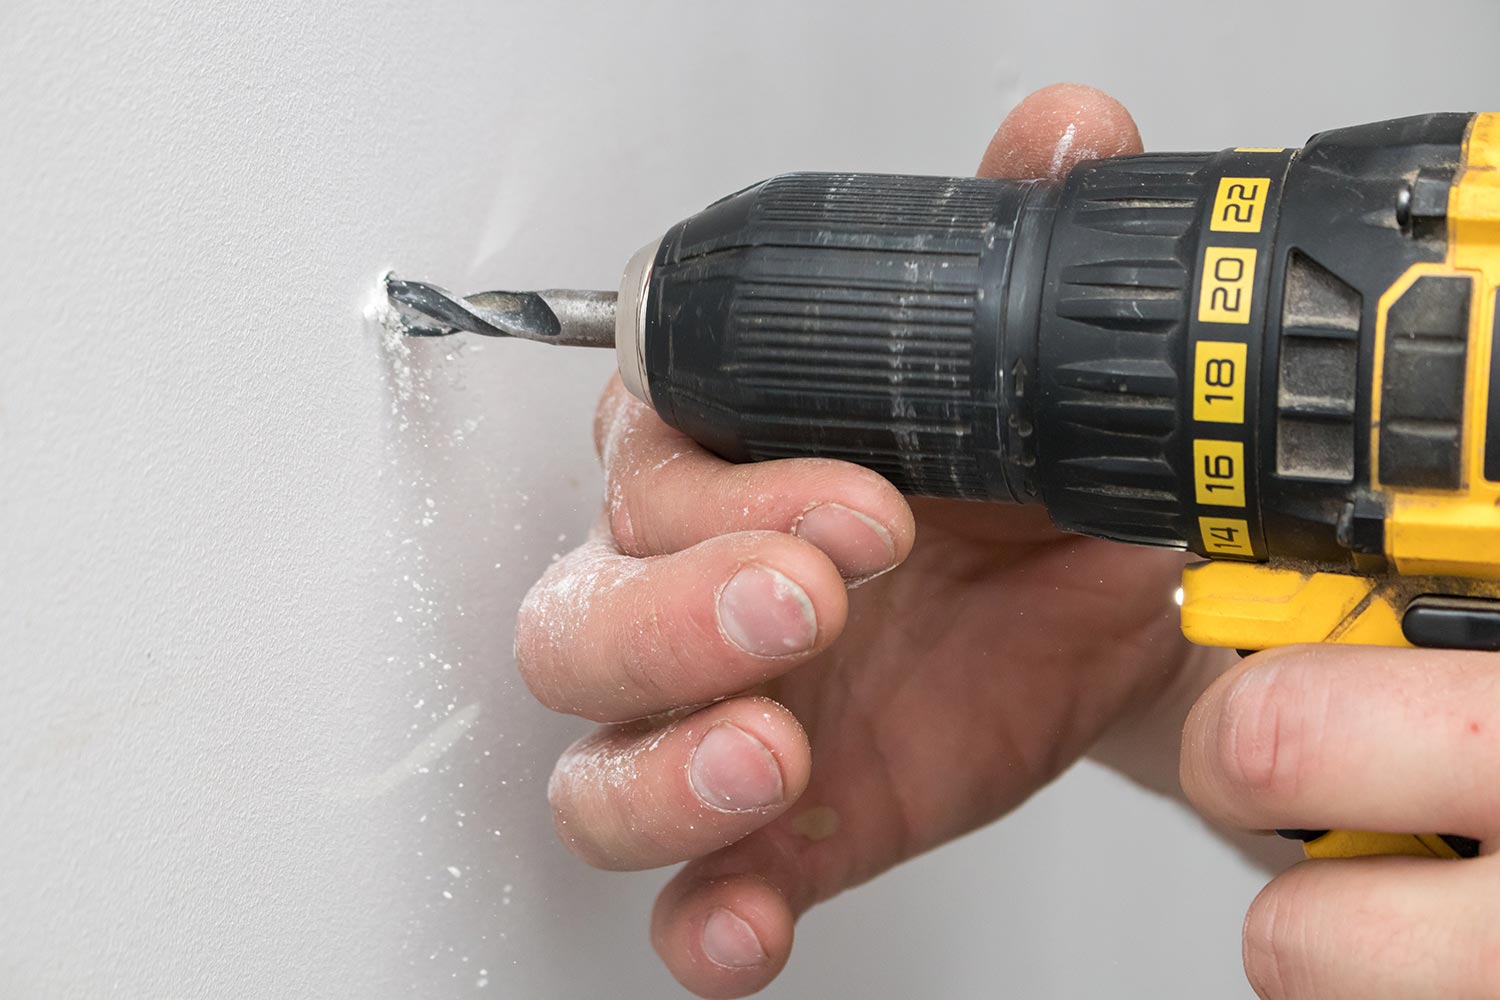 Drilling a white drywall wall